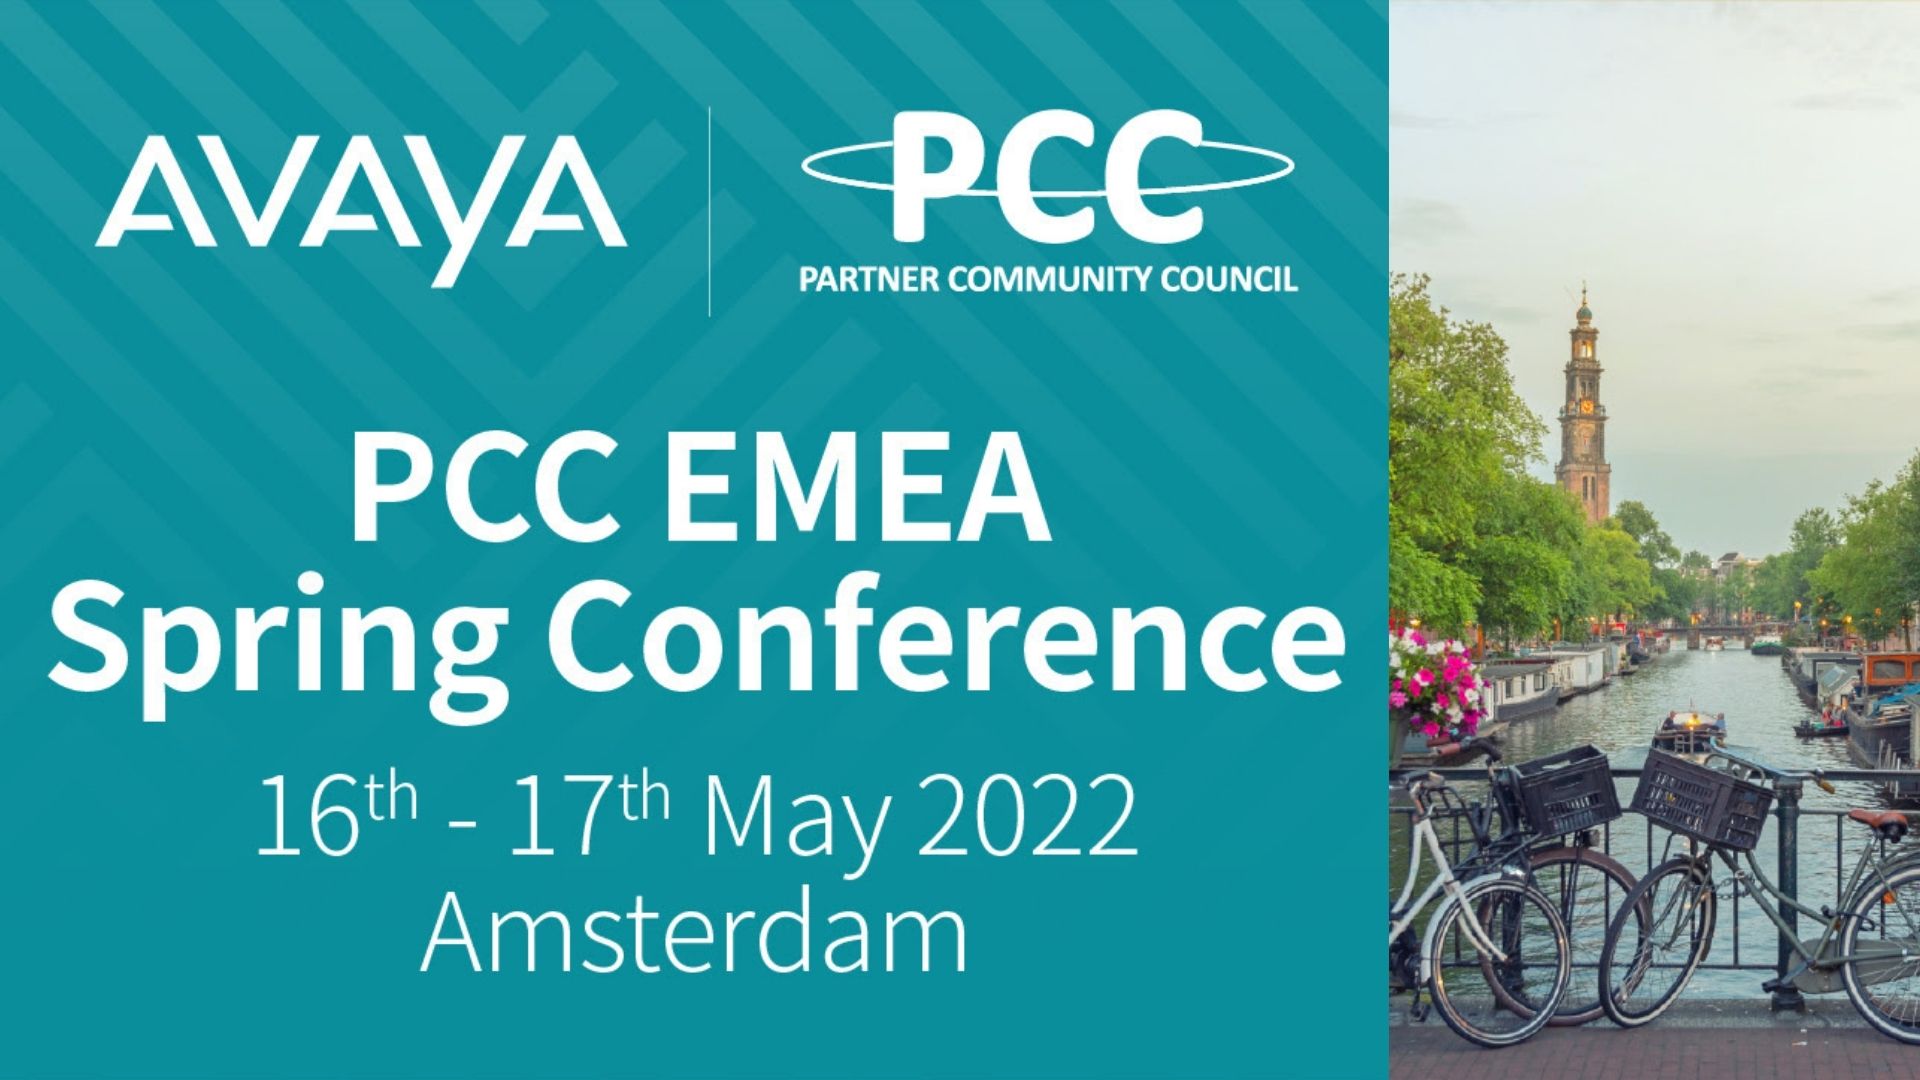 Fijowave goes PCC EMEA Spring Conference in Amsterdam 2022